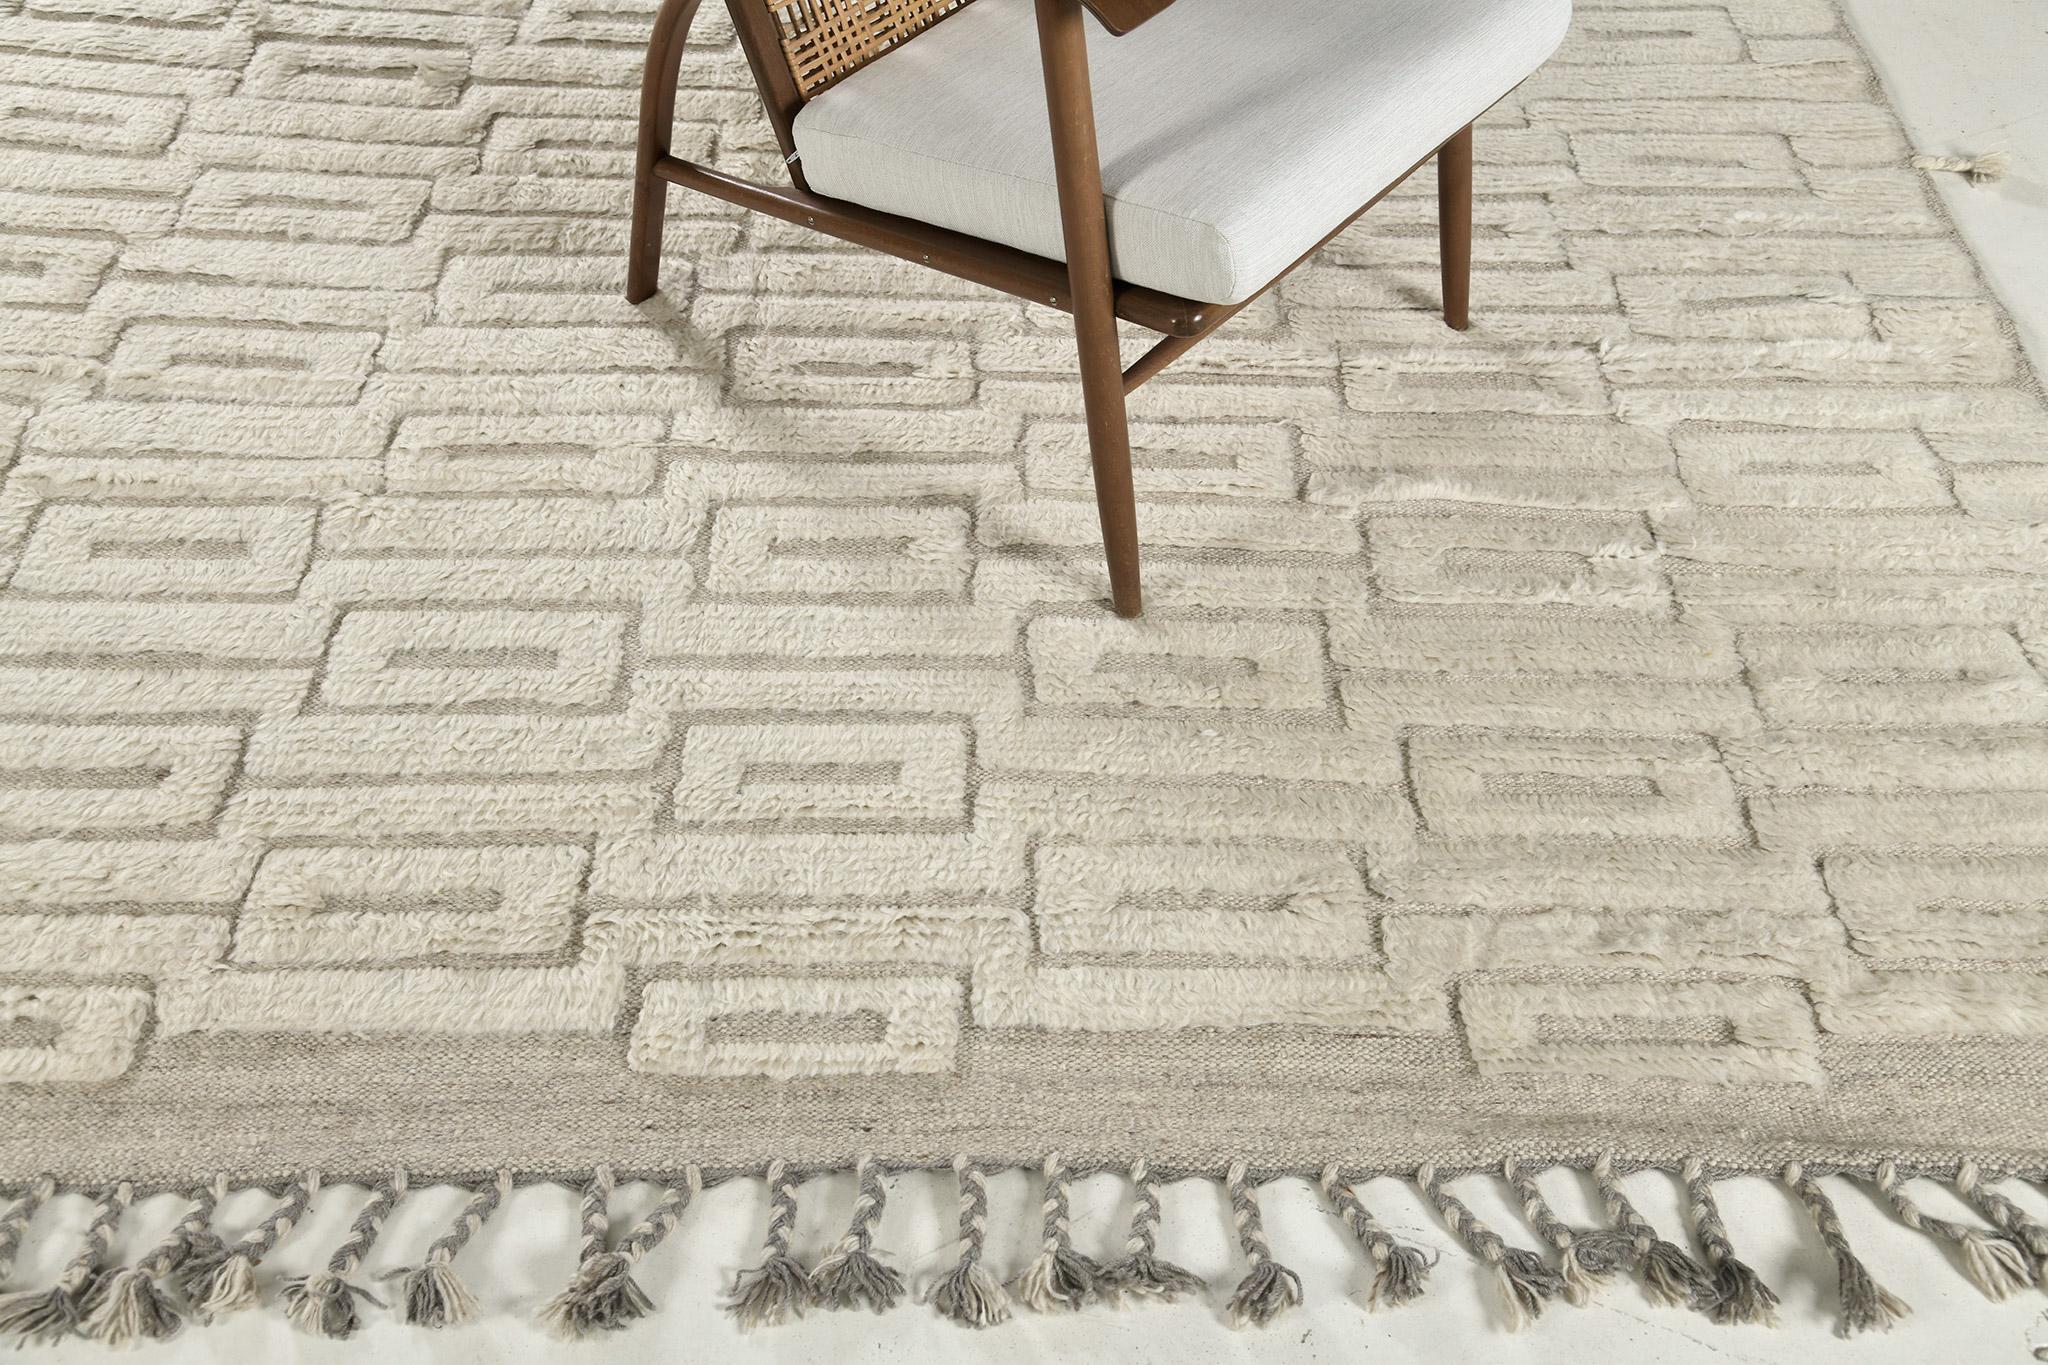 Gavle is a handwoven luxurious wool rug made of remarkable and straightforward design and neutral tones. Geometric patterns are featured in this masterpiece that can be put in any host application. The Haute Bohemian collection designed in Los